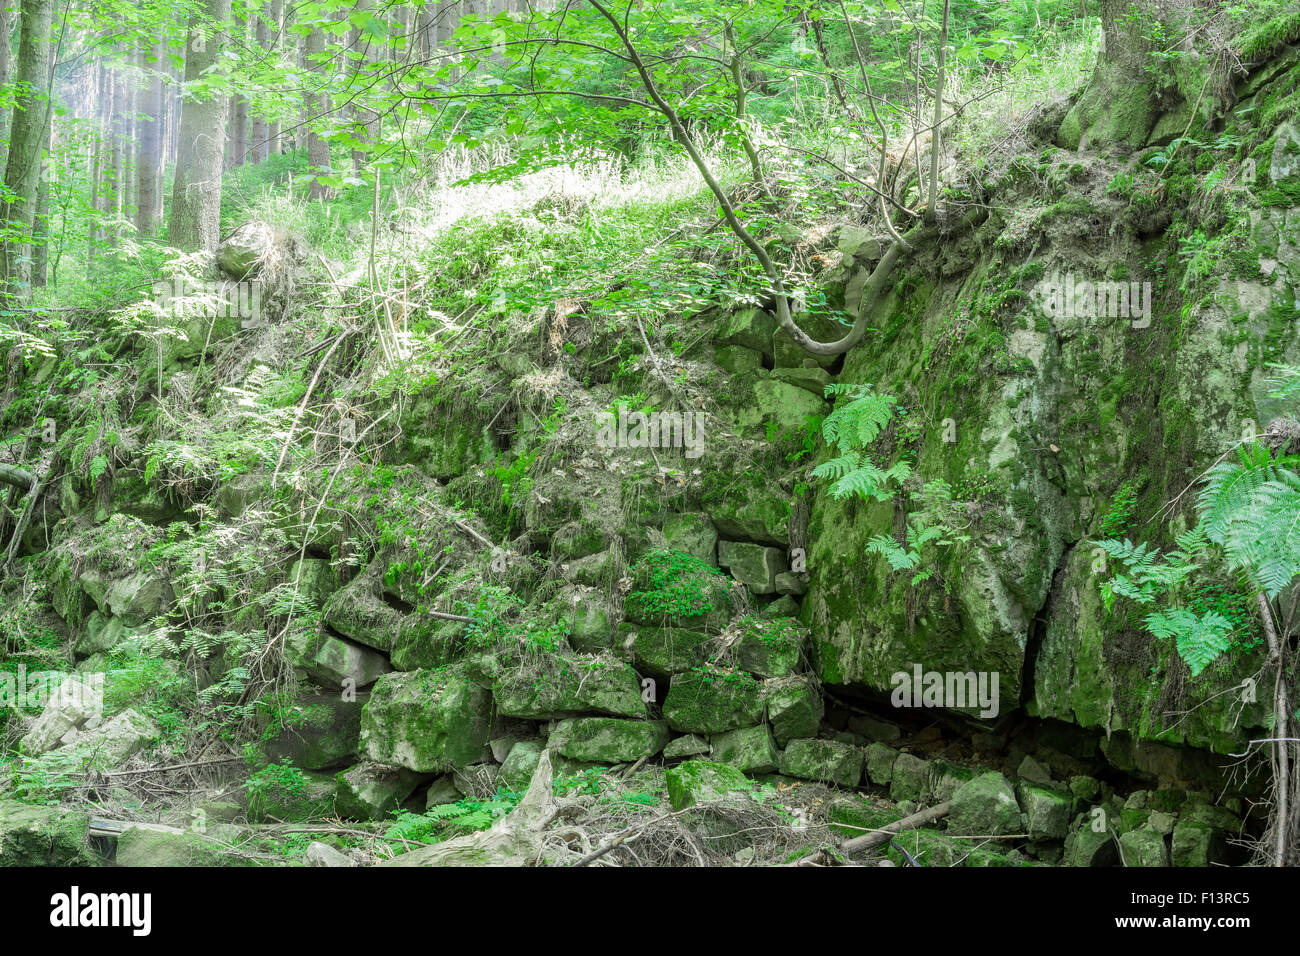 Rocks covered with moss and forest plants Stock Photo